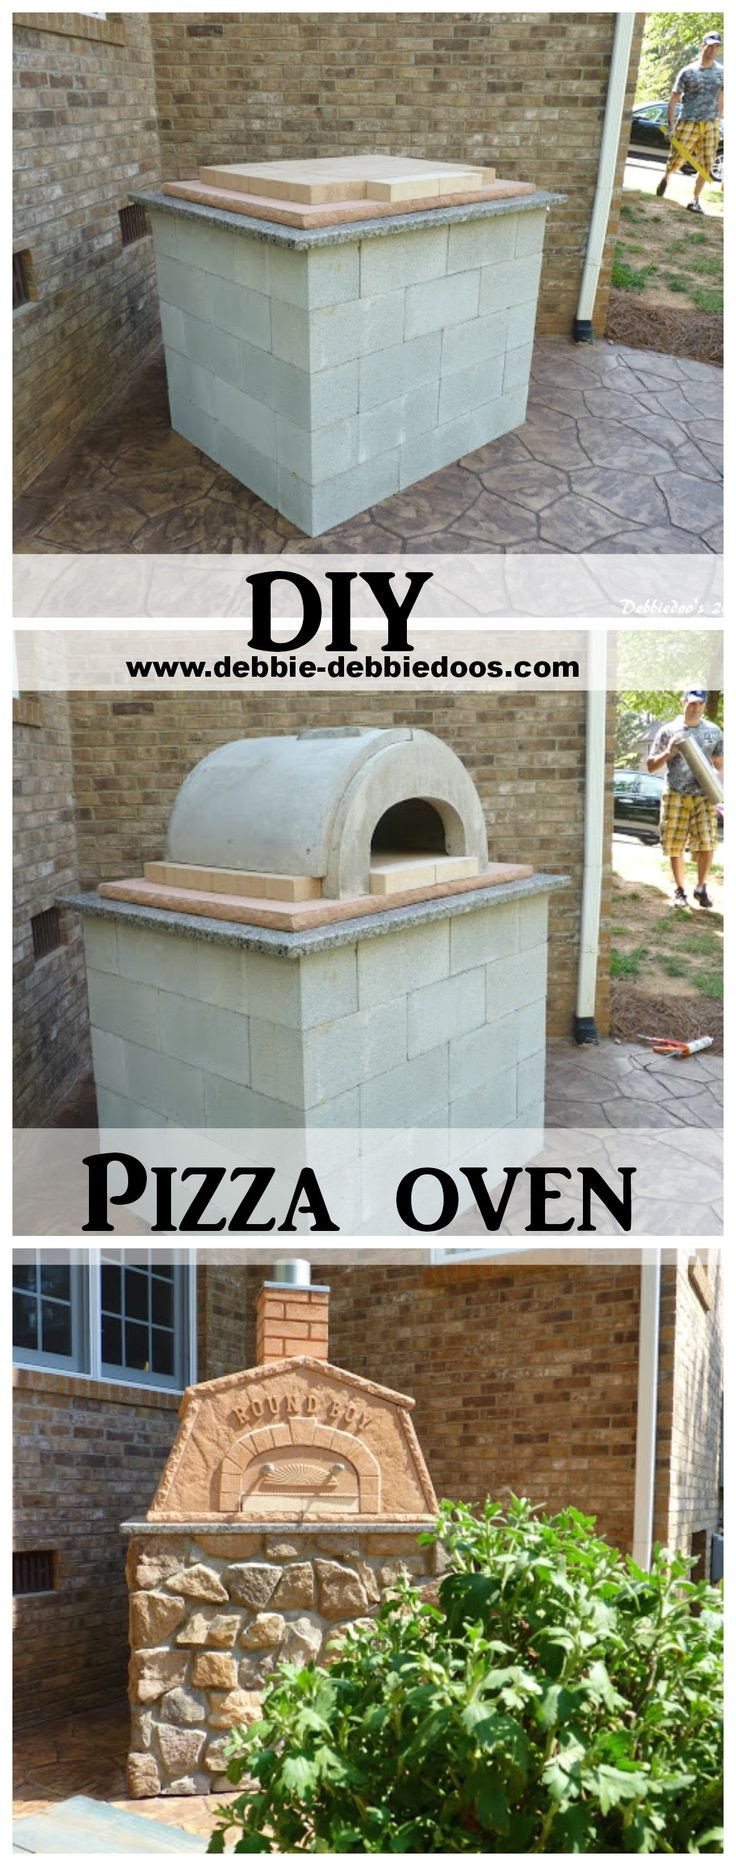 DIY Pizza Oven Outdoor
 Make your own outdoor pizza oven DIY pizza oven tutorial